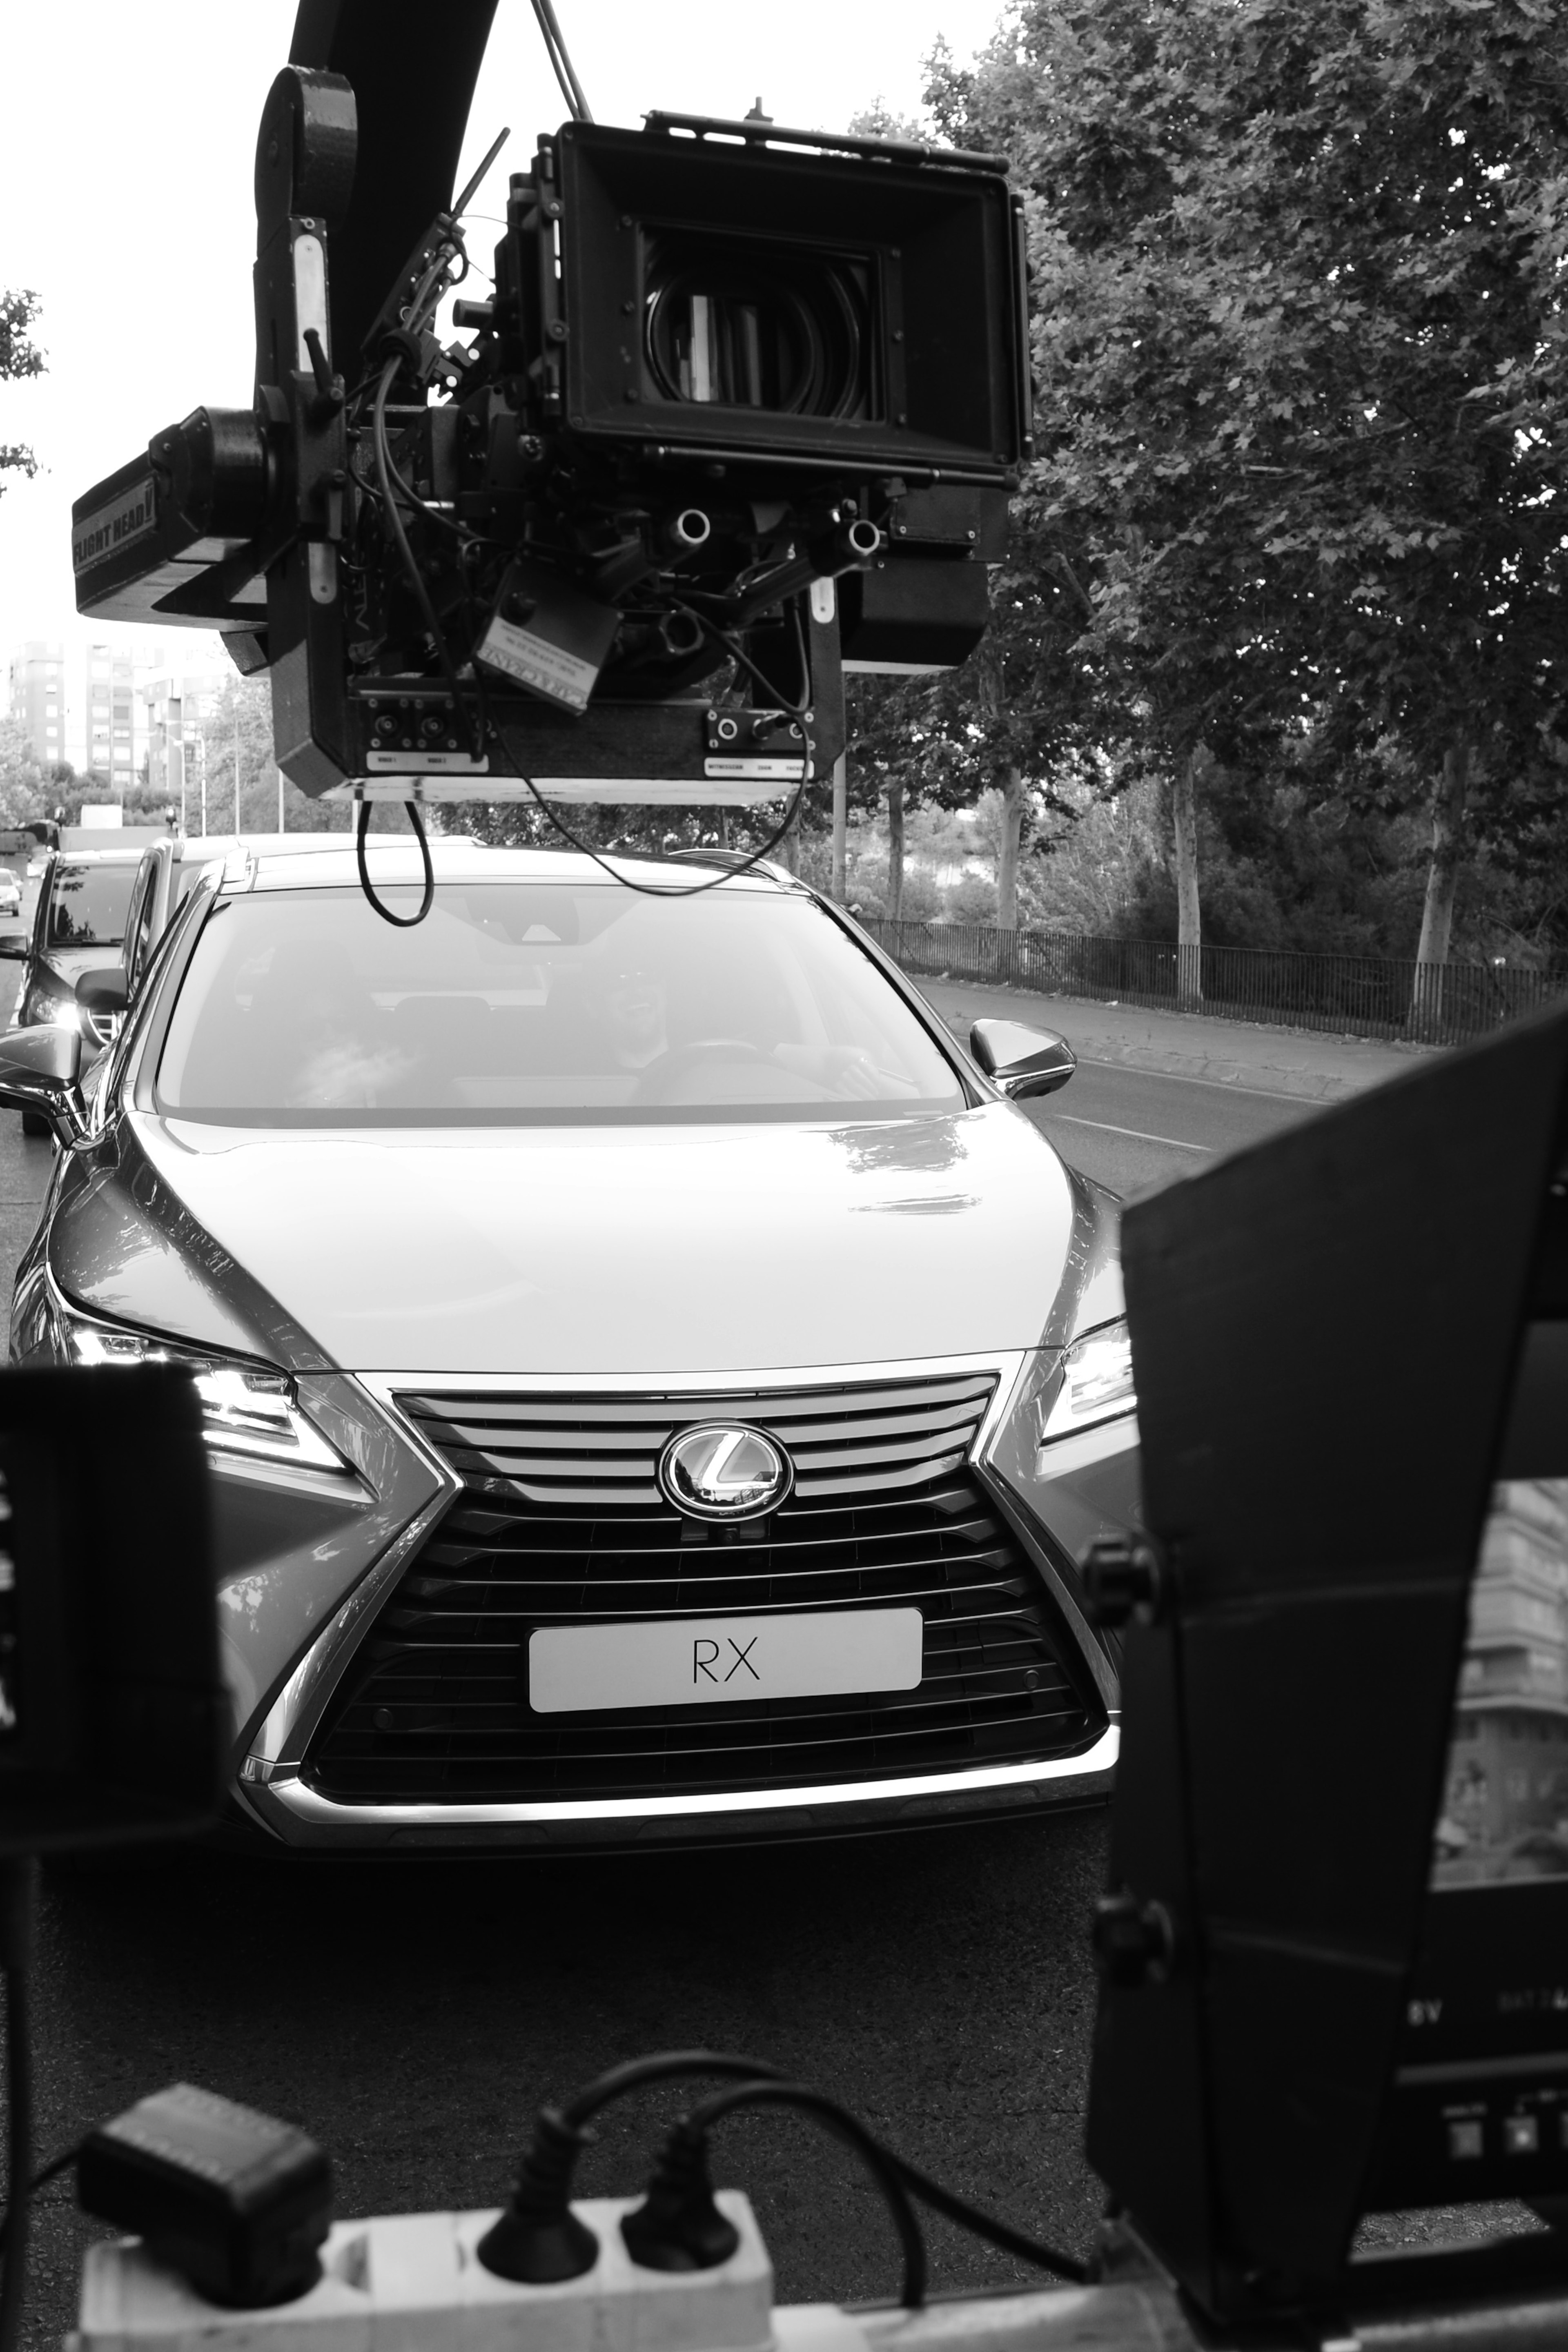 Lexus RX TVC for CHI/AHFC